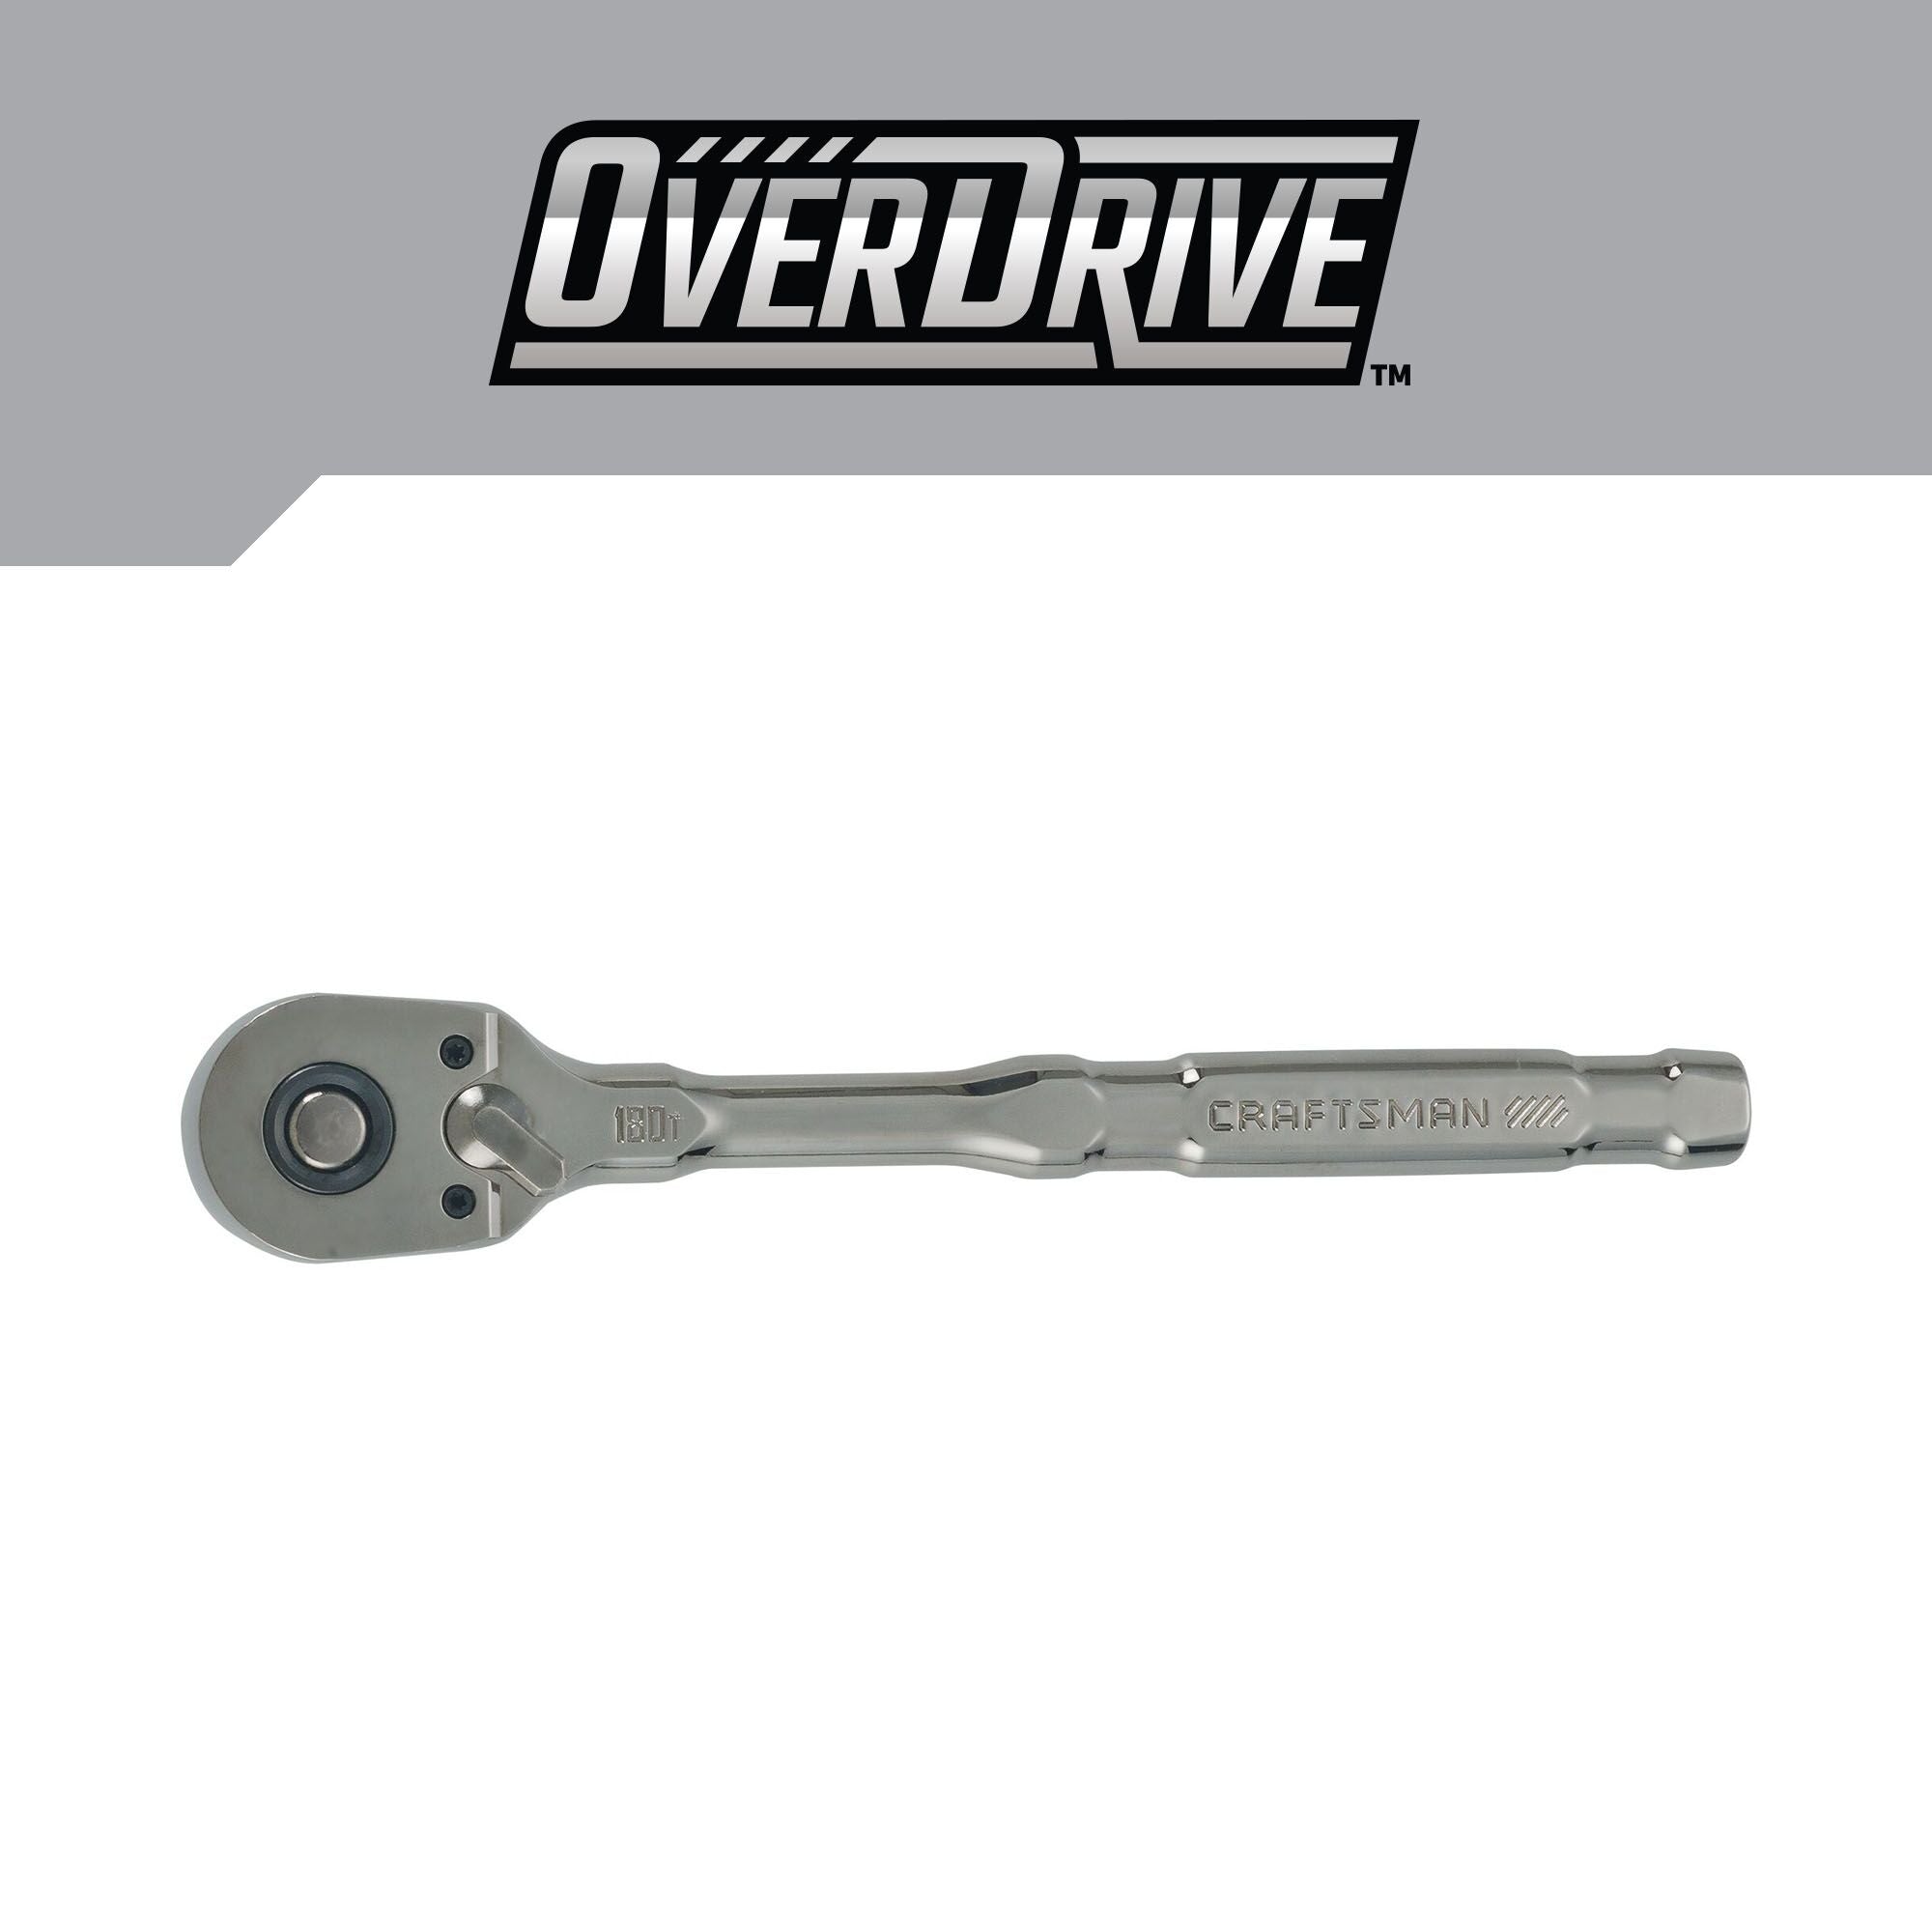 CRAFTSMAN OVERDRIVE 3/8 INCH DRIVE RATCHET on white background